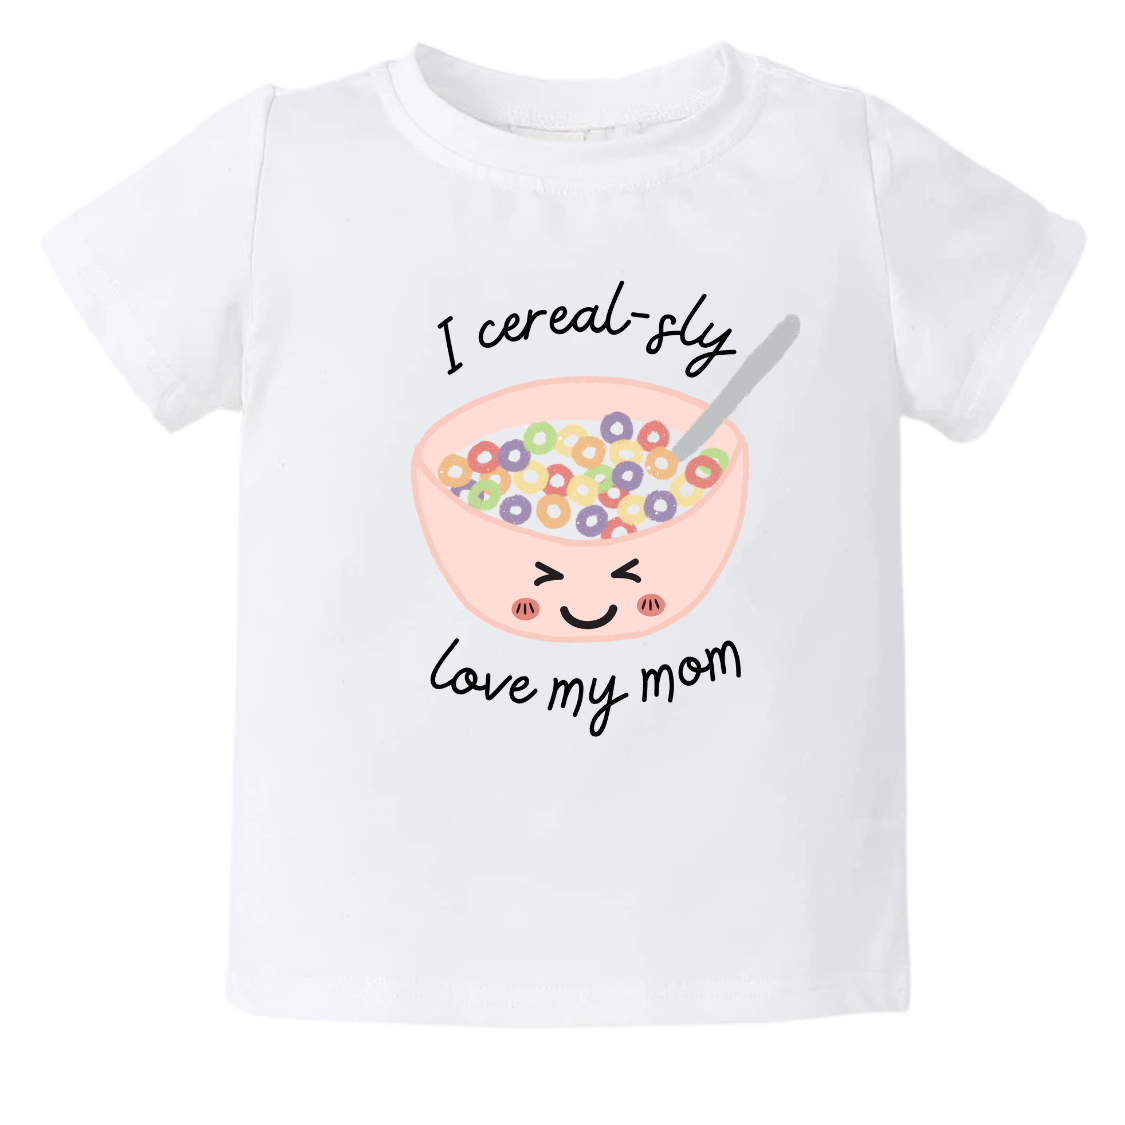 Cute cereal bowl graphic print with customizable text - 'I Cereal-sly Love My Mom' on a kid t-shirt and baby onesie. High-quality and vibrant design for adorable children's clothing. Perfect gift option to express love for Mom. 